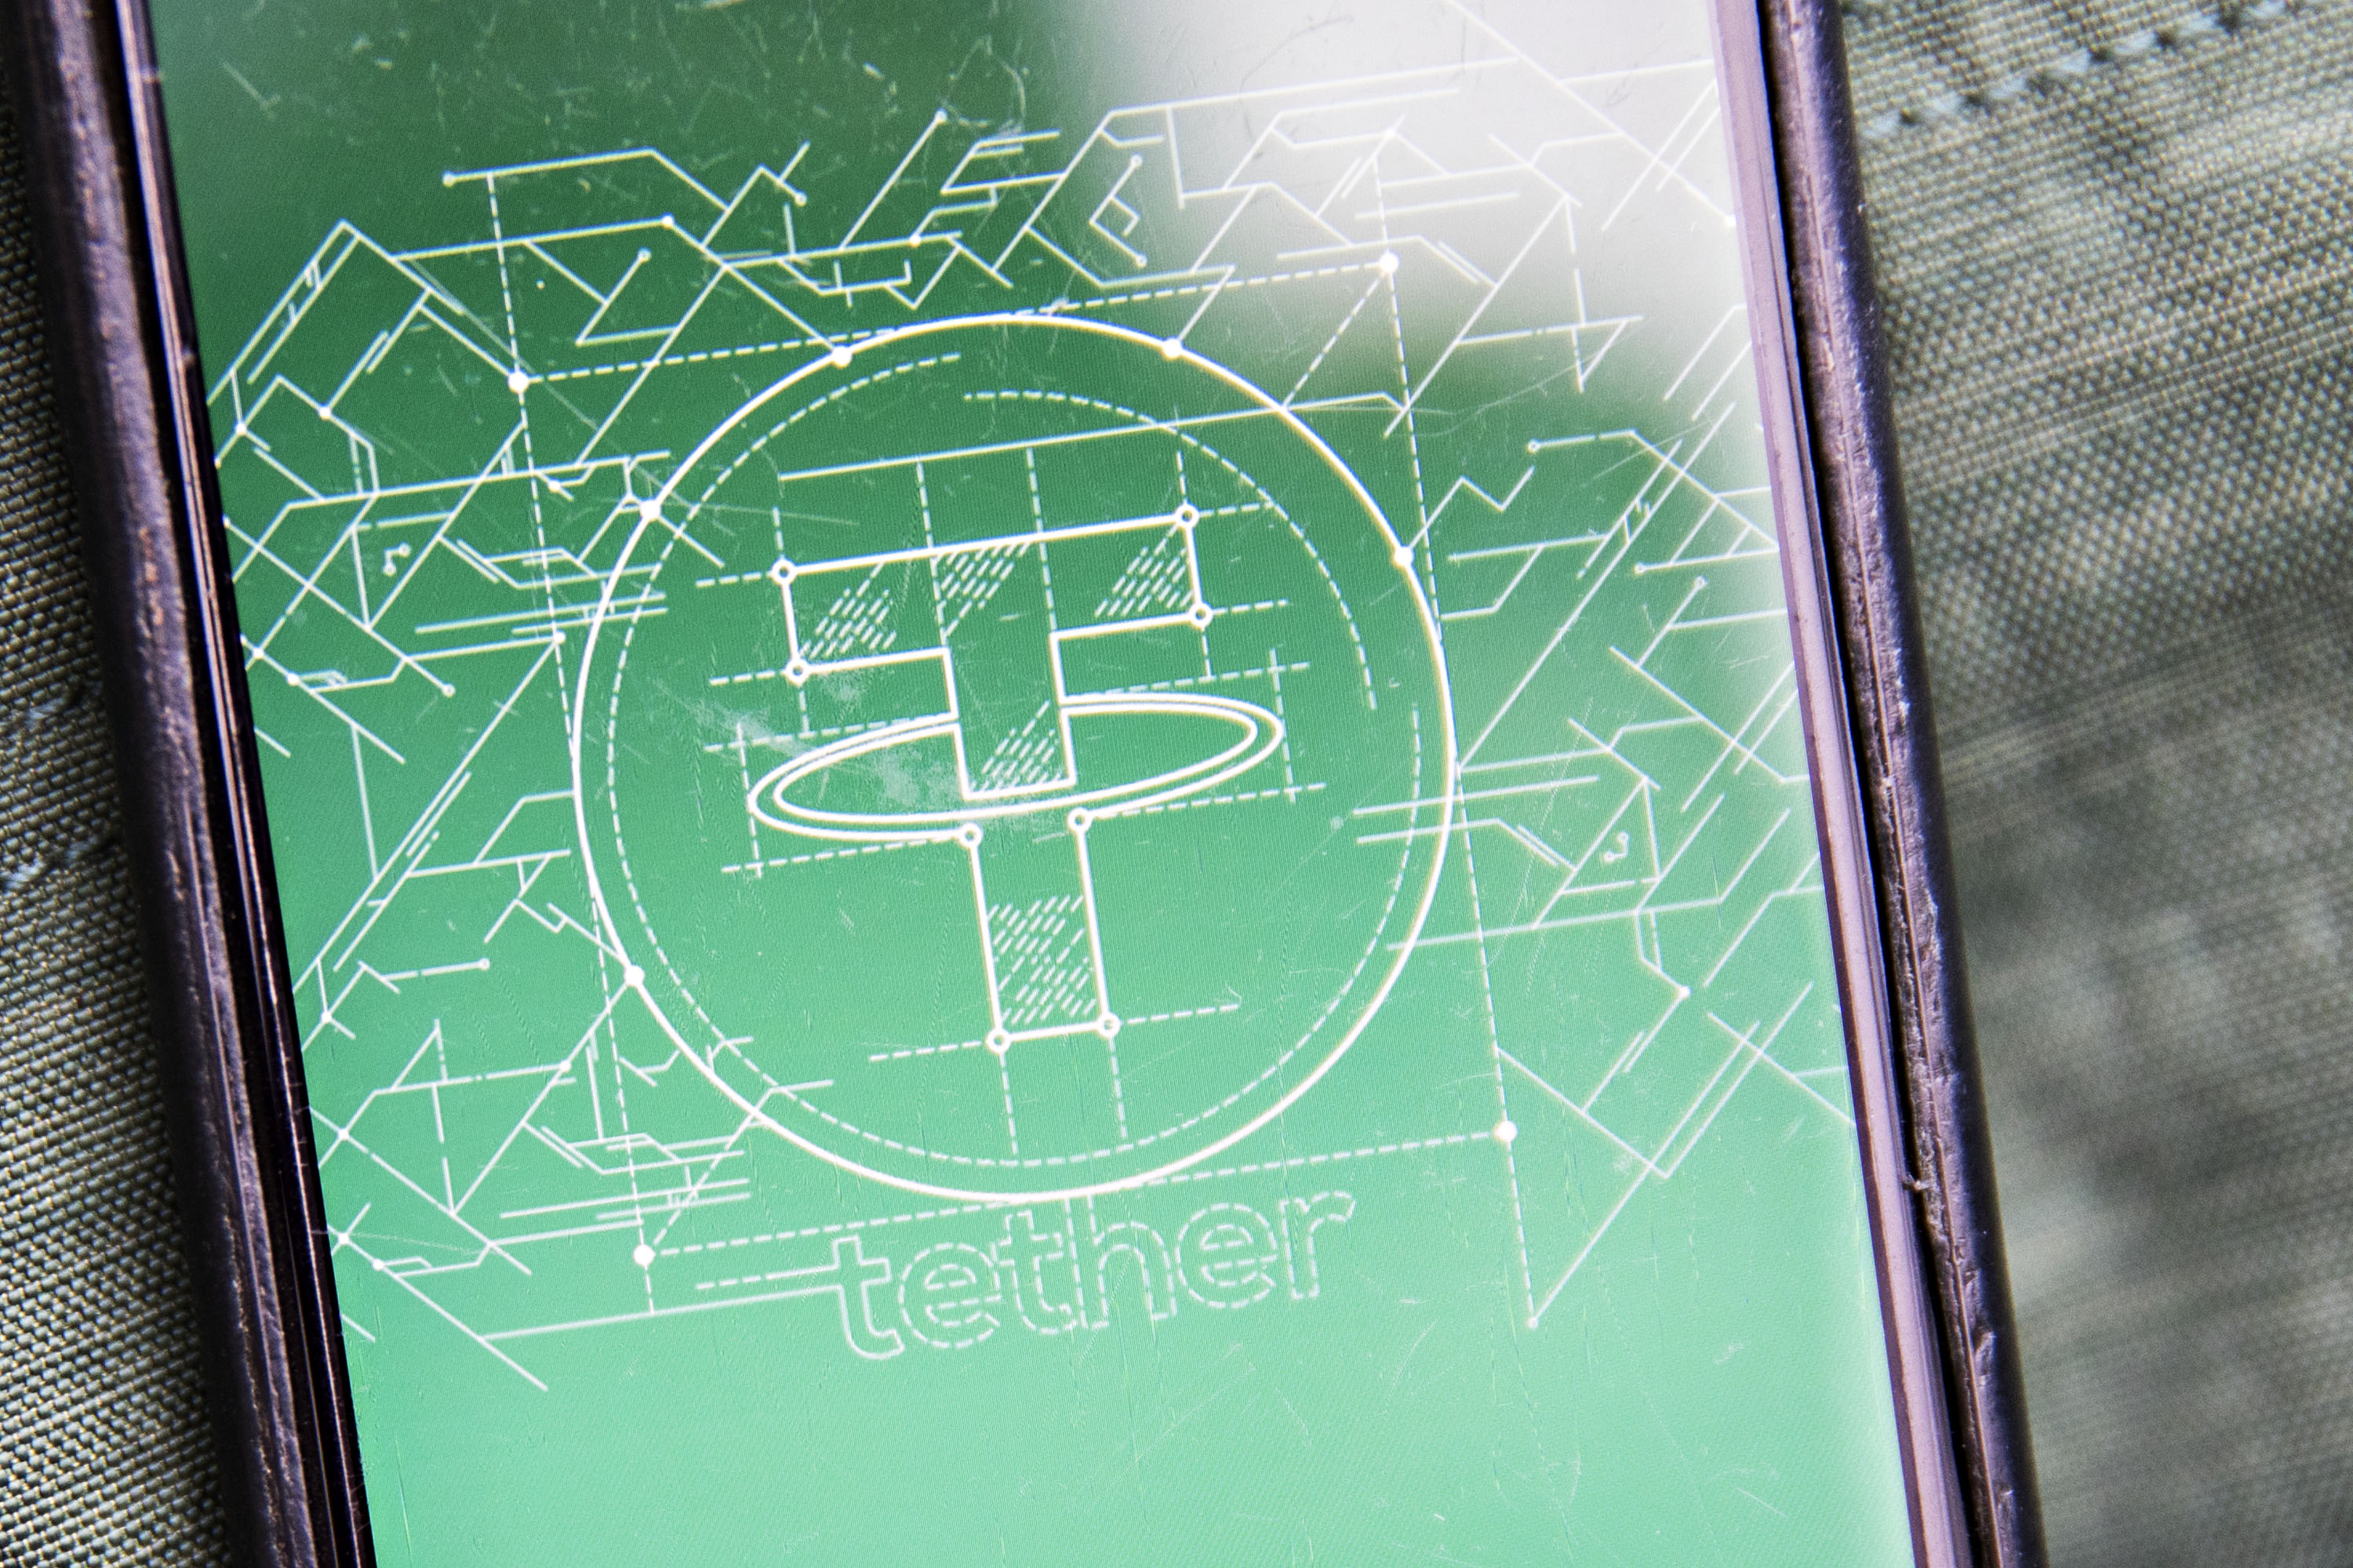 Crypto Exchange Bitfinex, Tether Are Said Subpoenaed by CFTC